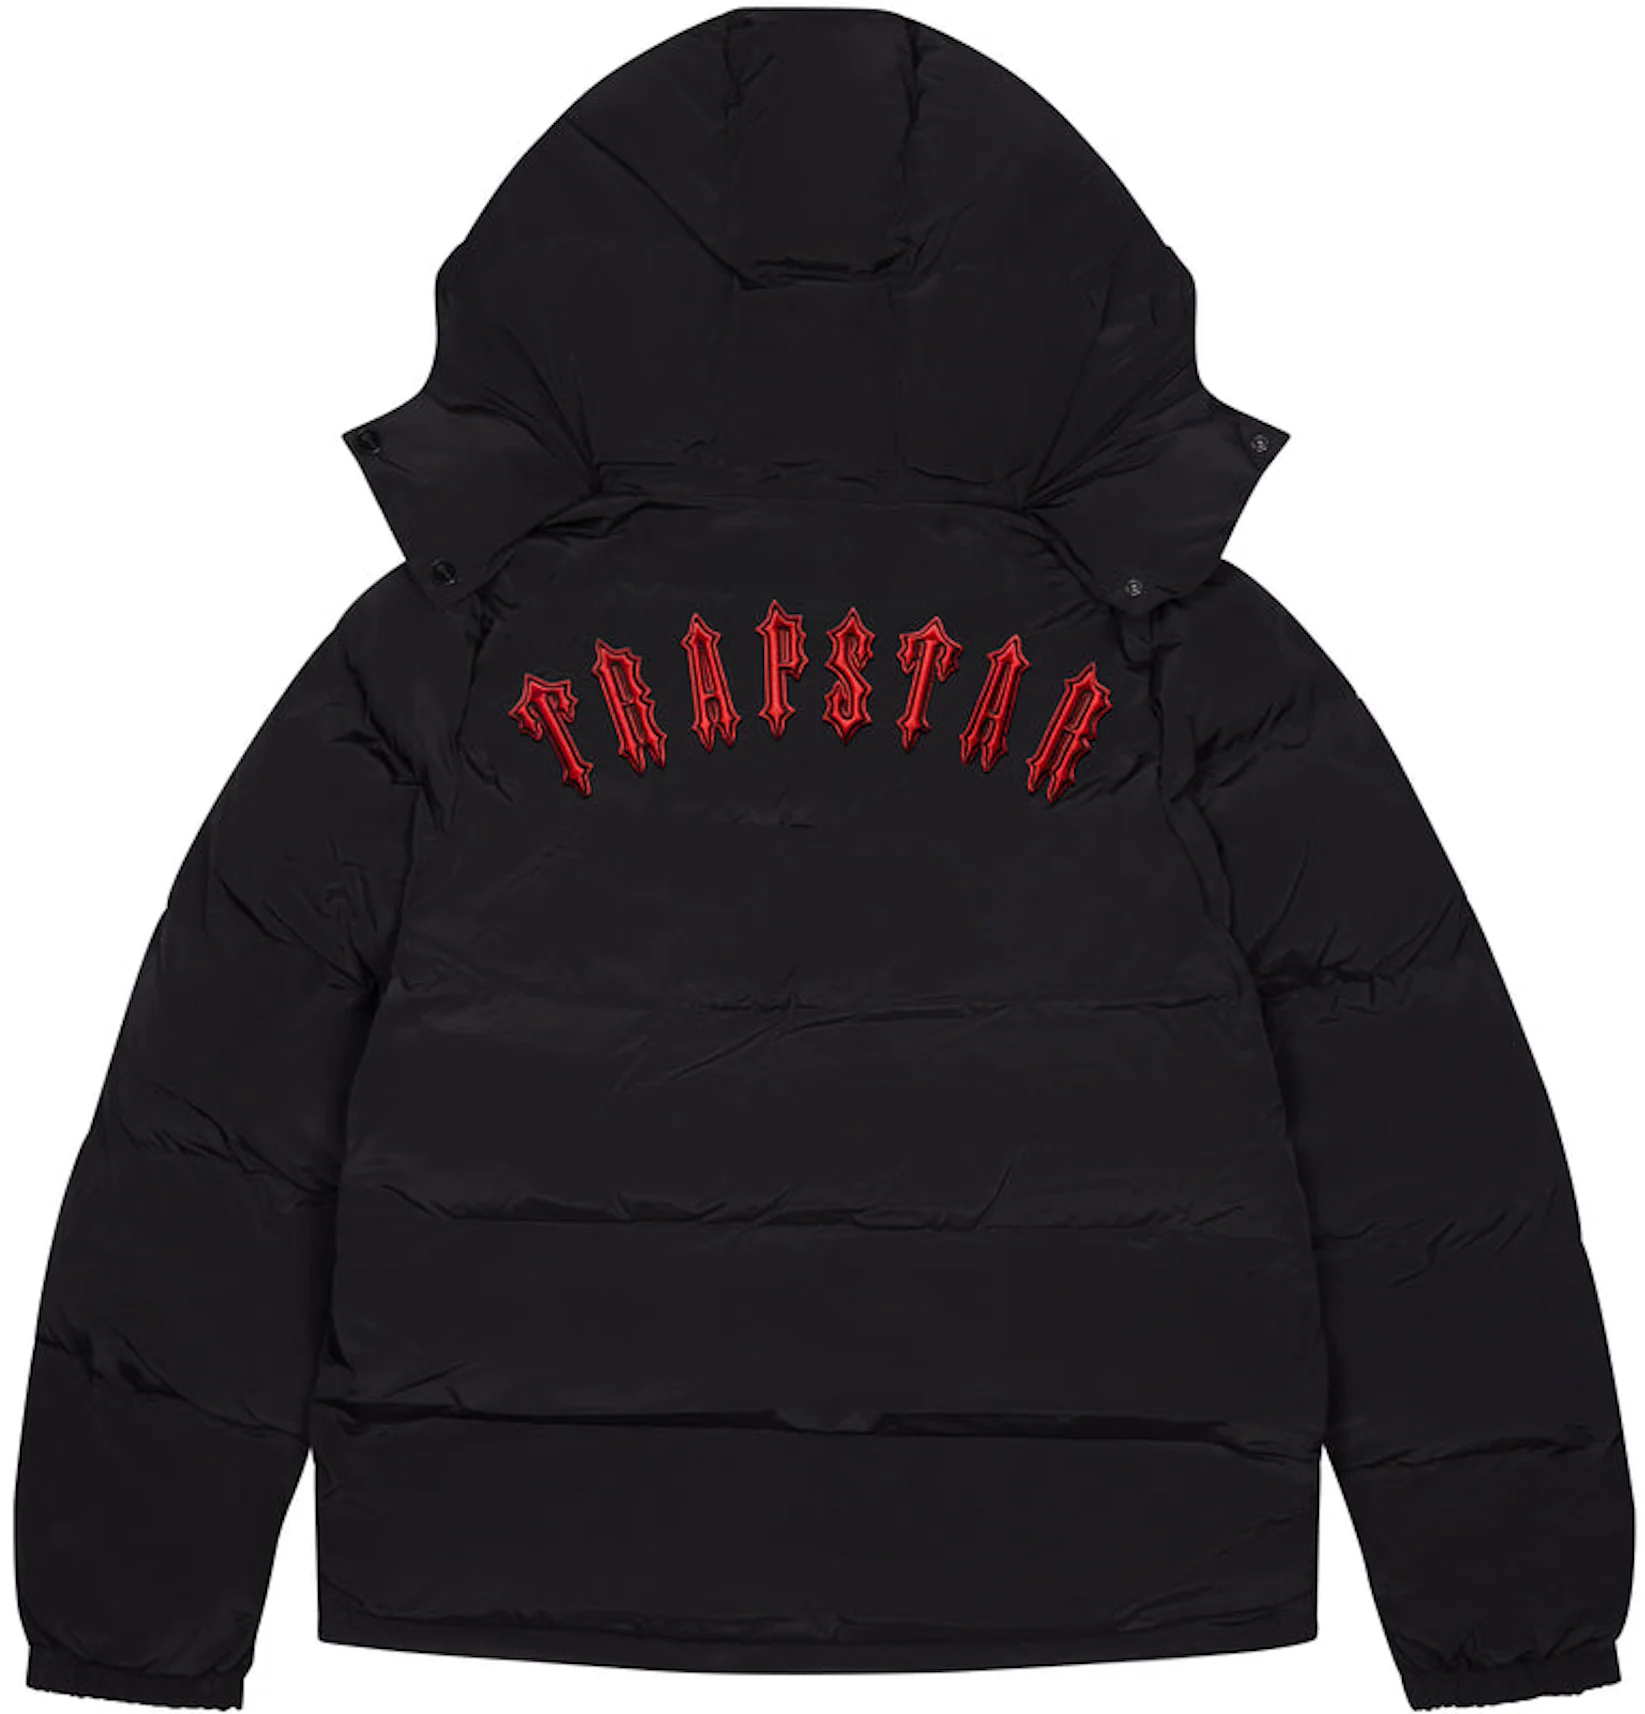 Winter Men Trapstar Jacket Aw20 Irongate Hooded Quilted Women Warm Vintage  Short Quality Embroidered Lettering Coat